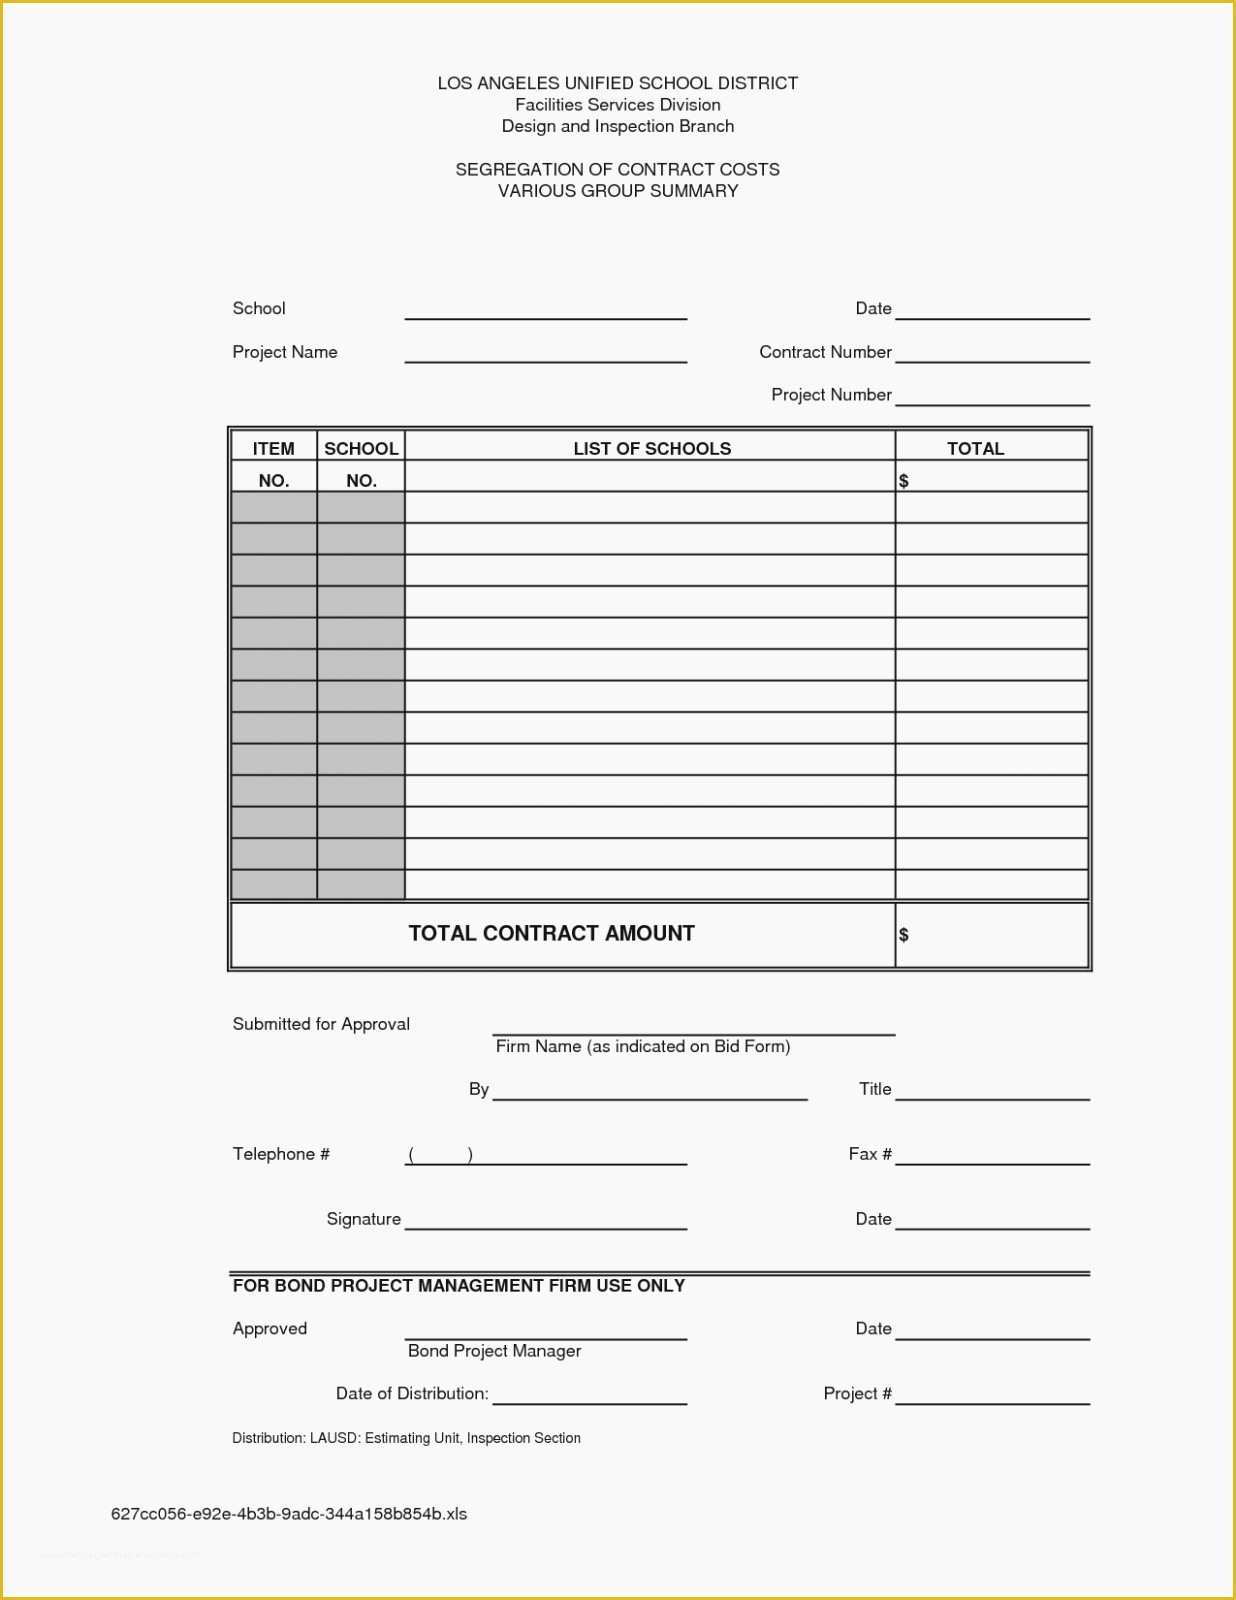 Contractor Bid Sheet Template Free Of Free Bid Sheet Template Excel Silent Auction Download